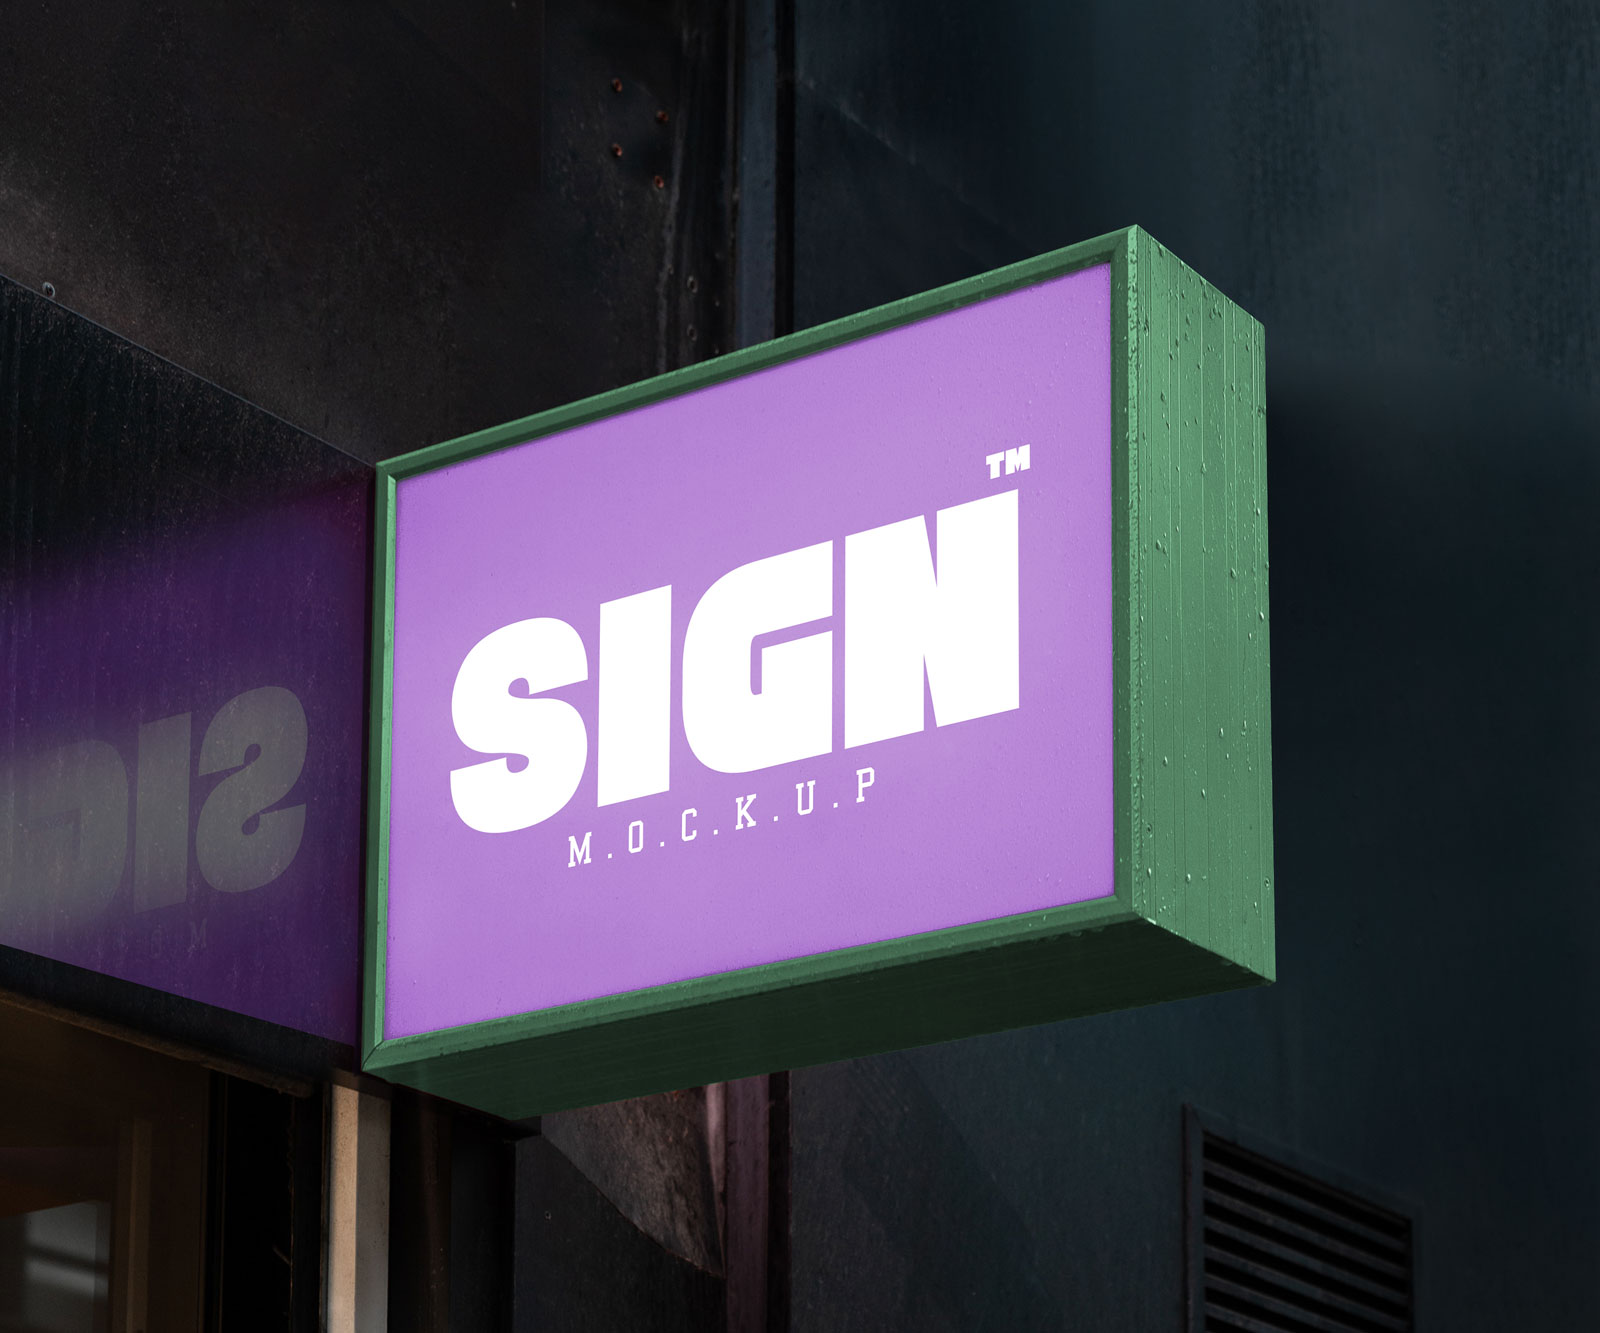 Free-Wall-Mounted-Signboard-Mockup-PSD-with-Reflection